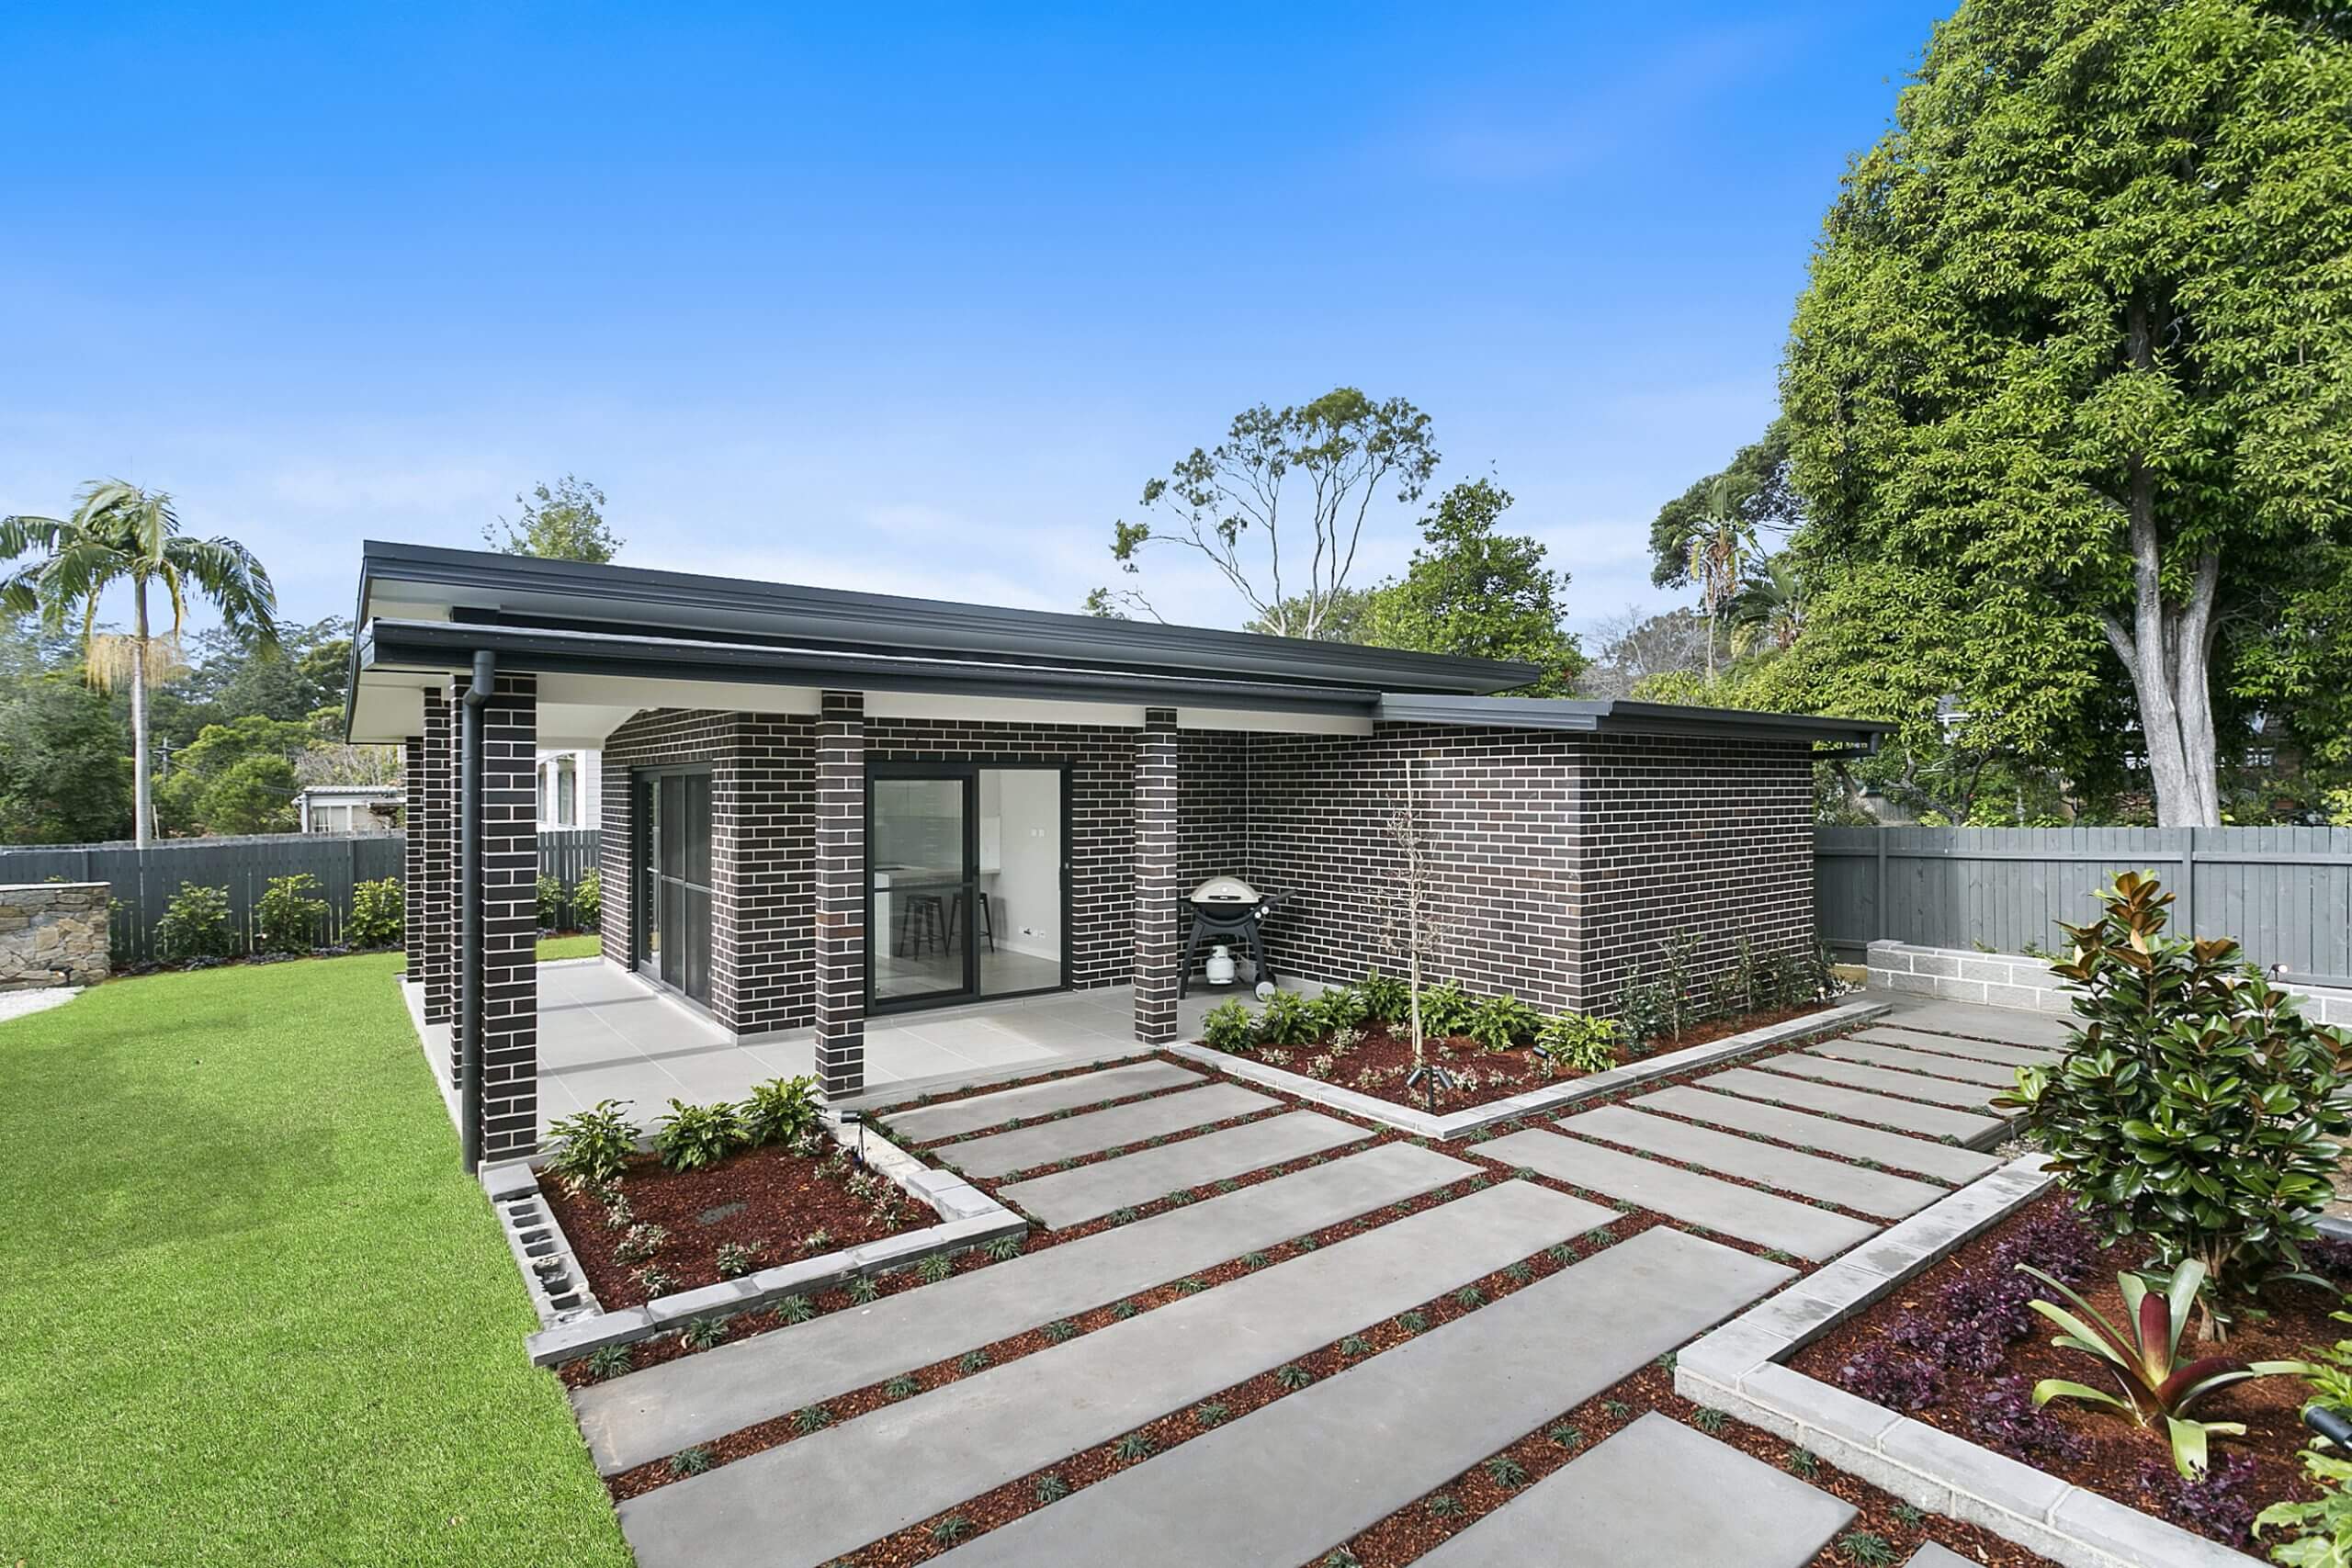 Top Rules to Consider When Building A Granny Flat In Sydney, NSW